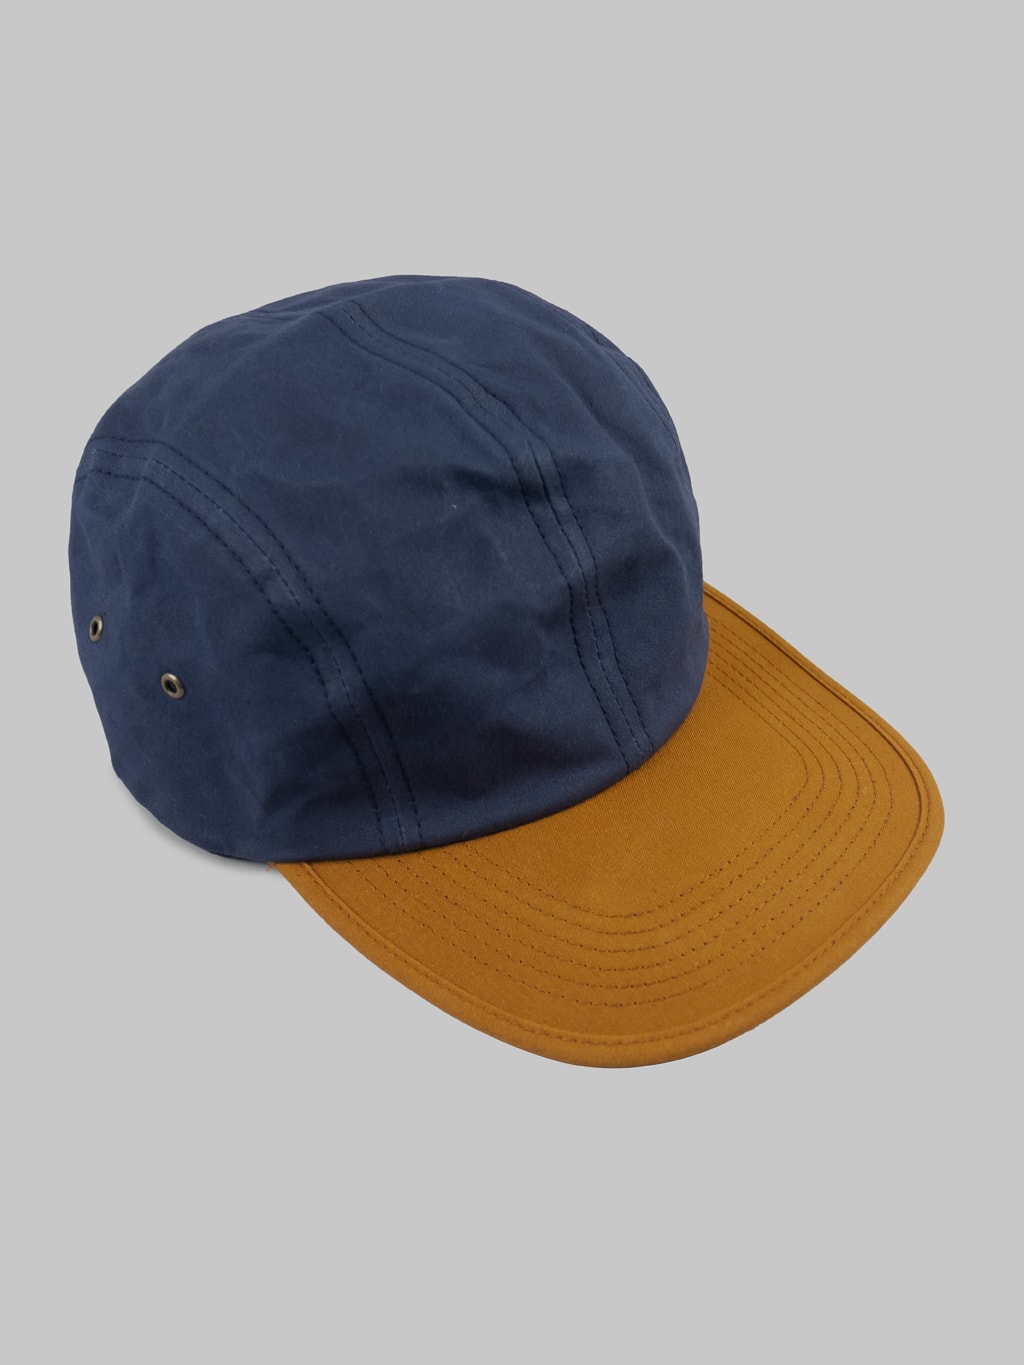 Mighty Shine Paraffin OX 4 Panel Cap navy one size